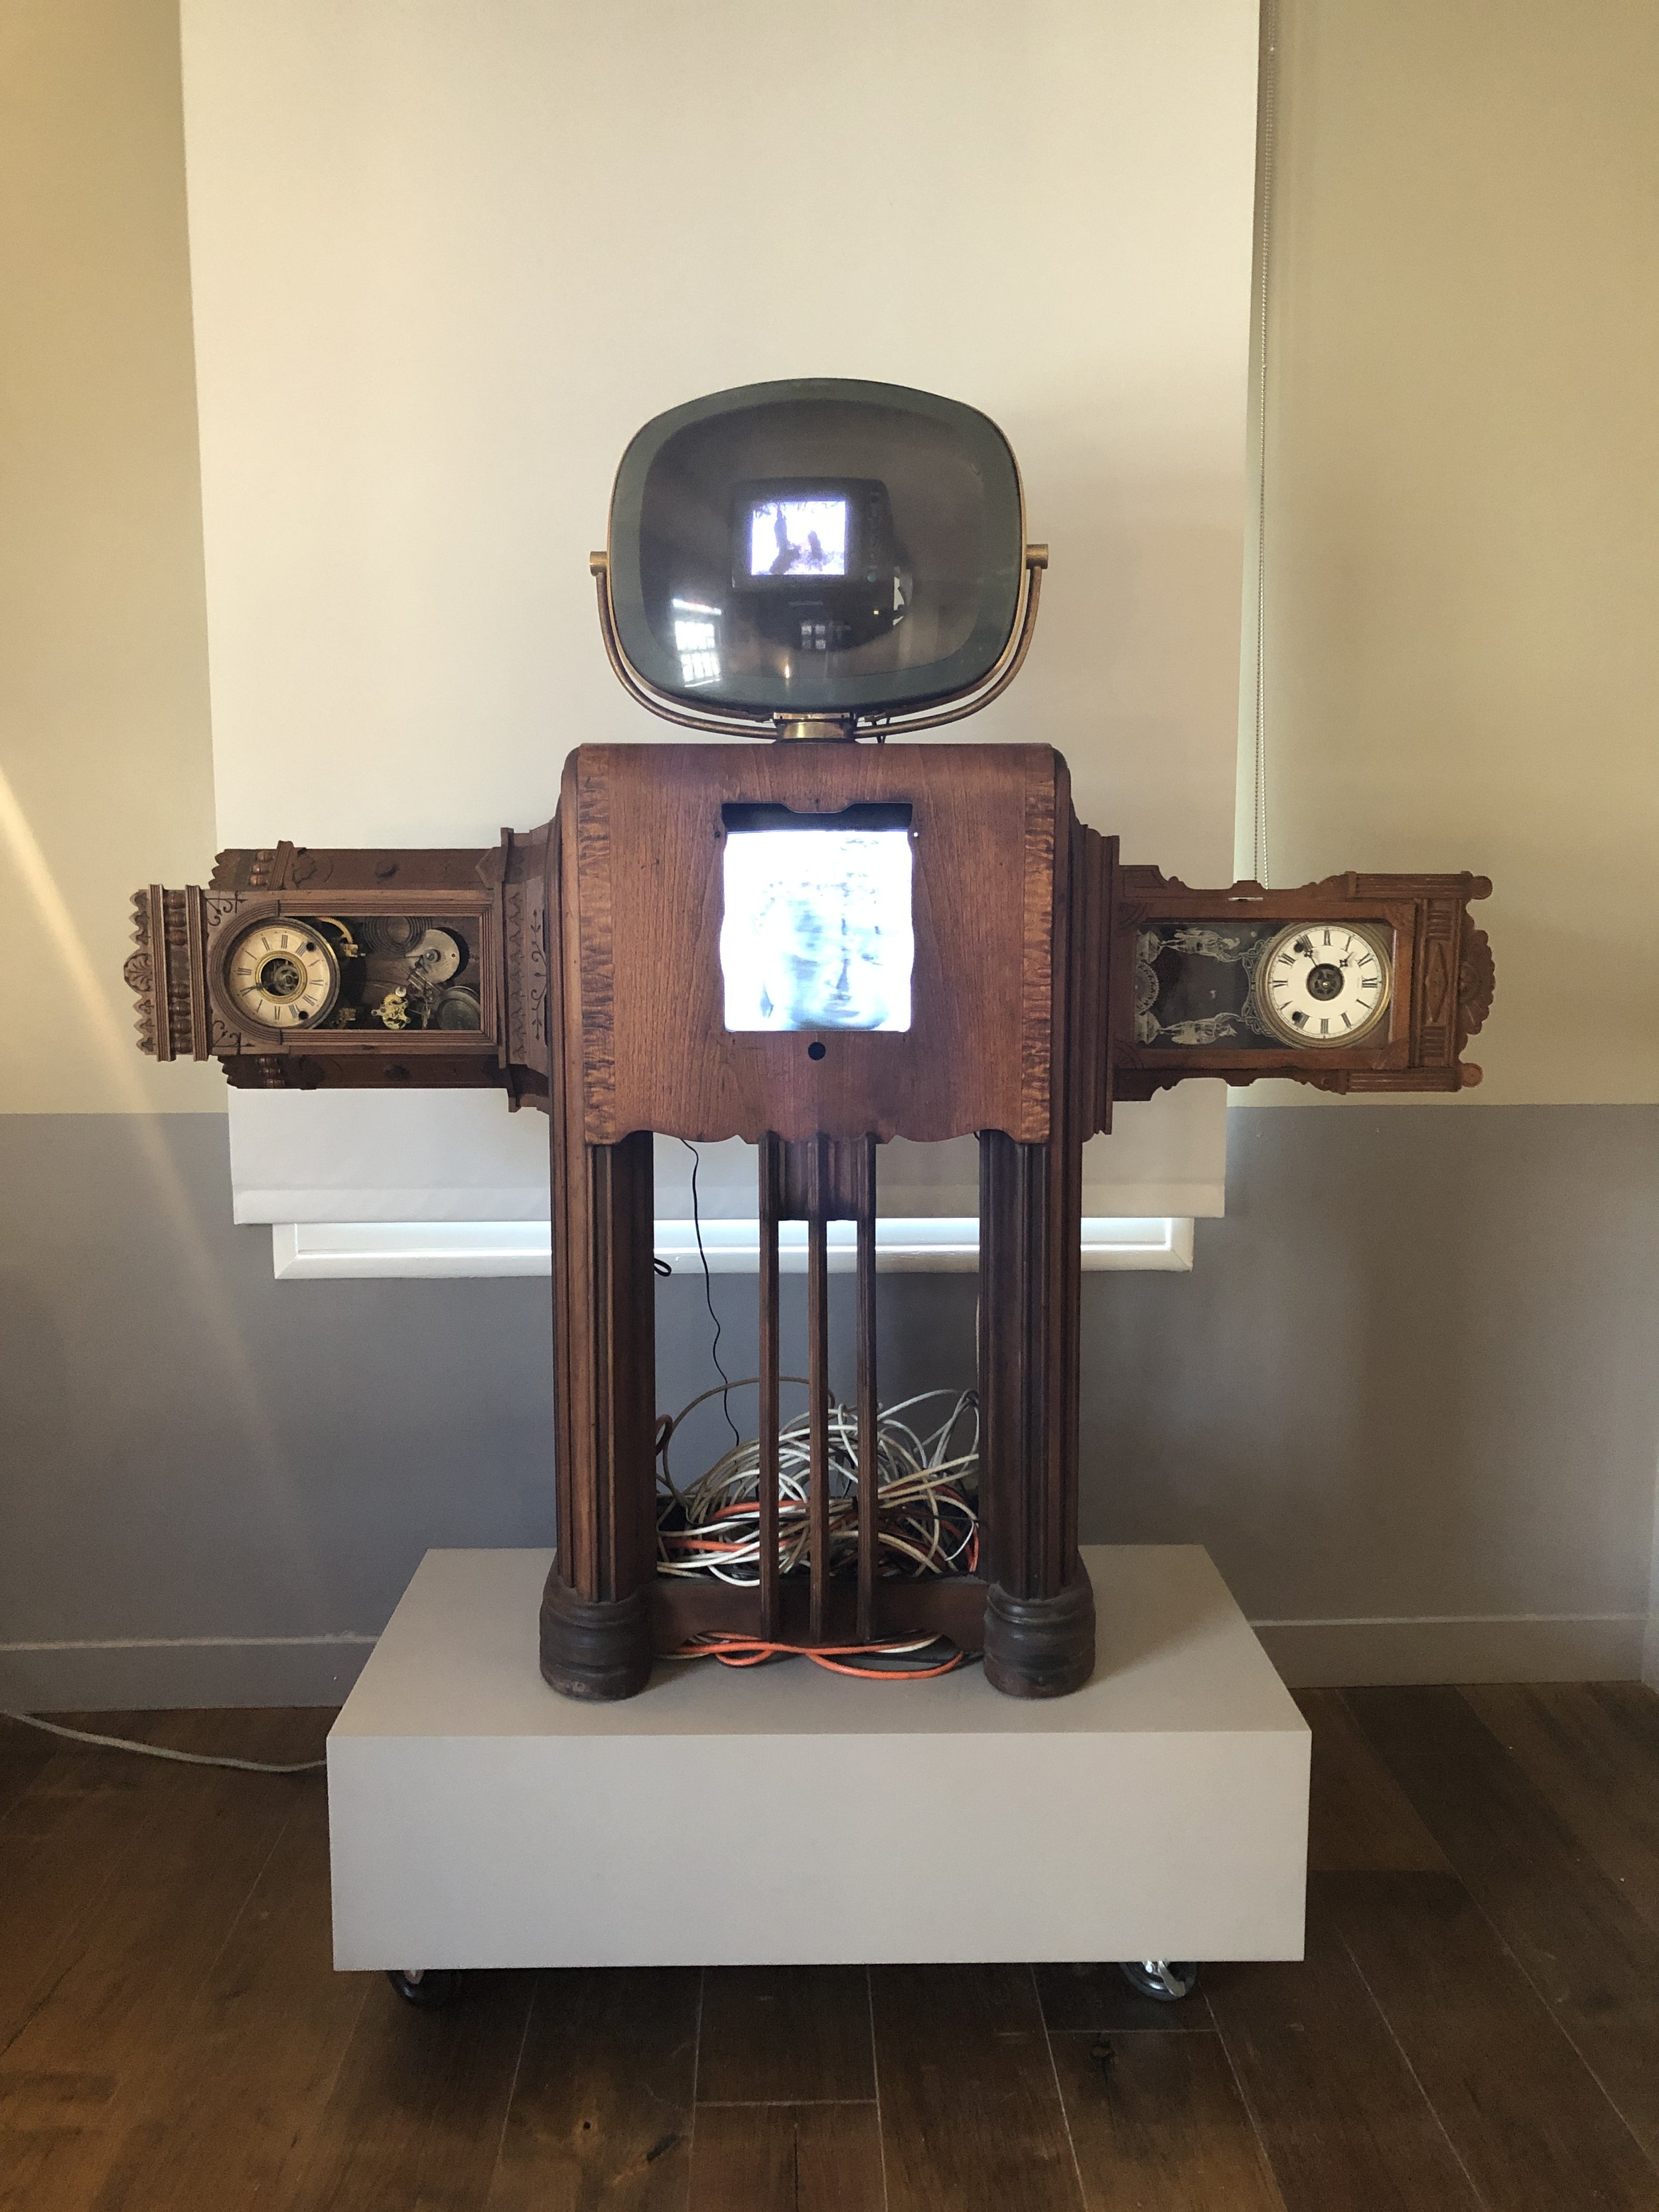  Nam June Paik,  Clock Arms Robot , 1995. Antique TV cabinet, antique clocks, two channel video and two video monitors. 72 x 61 x 21 inches.&nbsp;Installation at Felix Art Fair, 2020.  